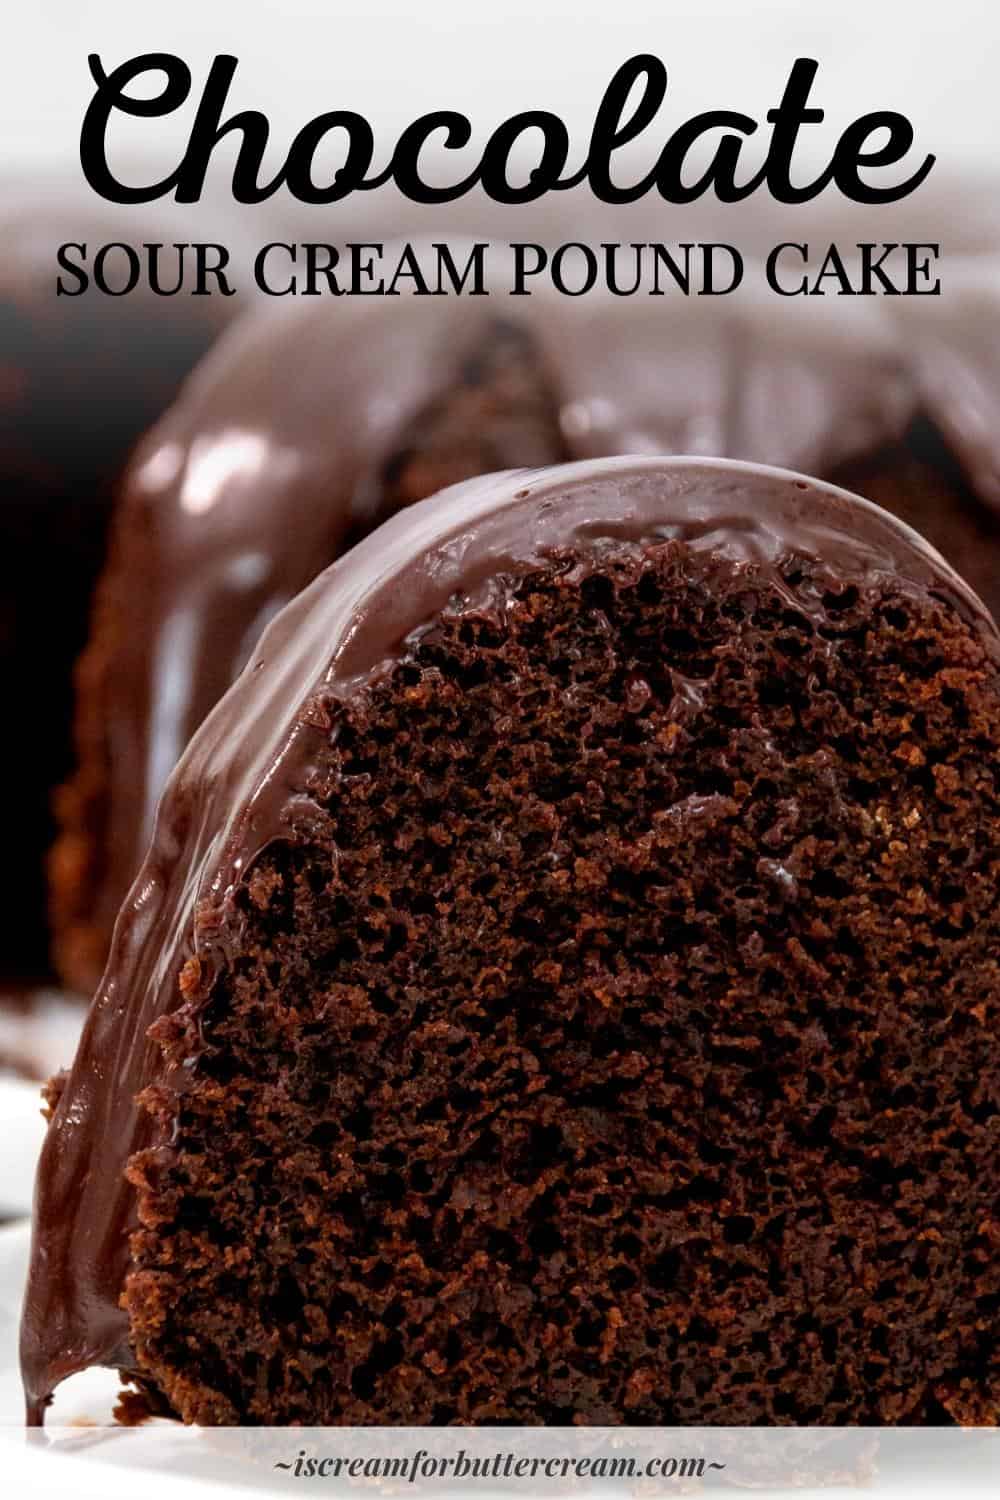 Pin image with close up view moist sour cream and chocolate cake with text overlay.